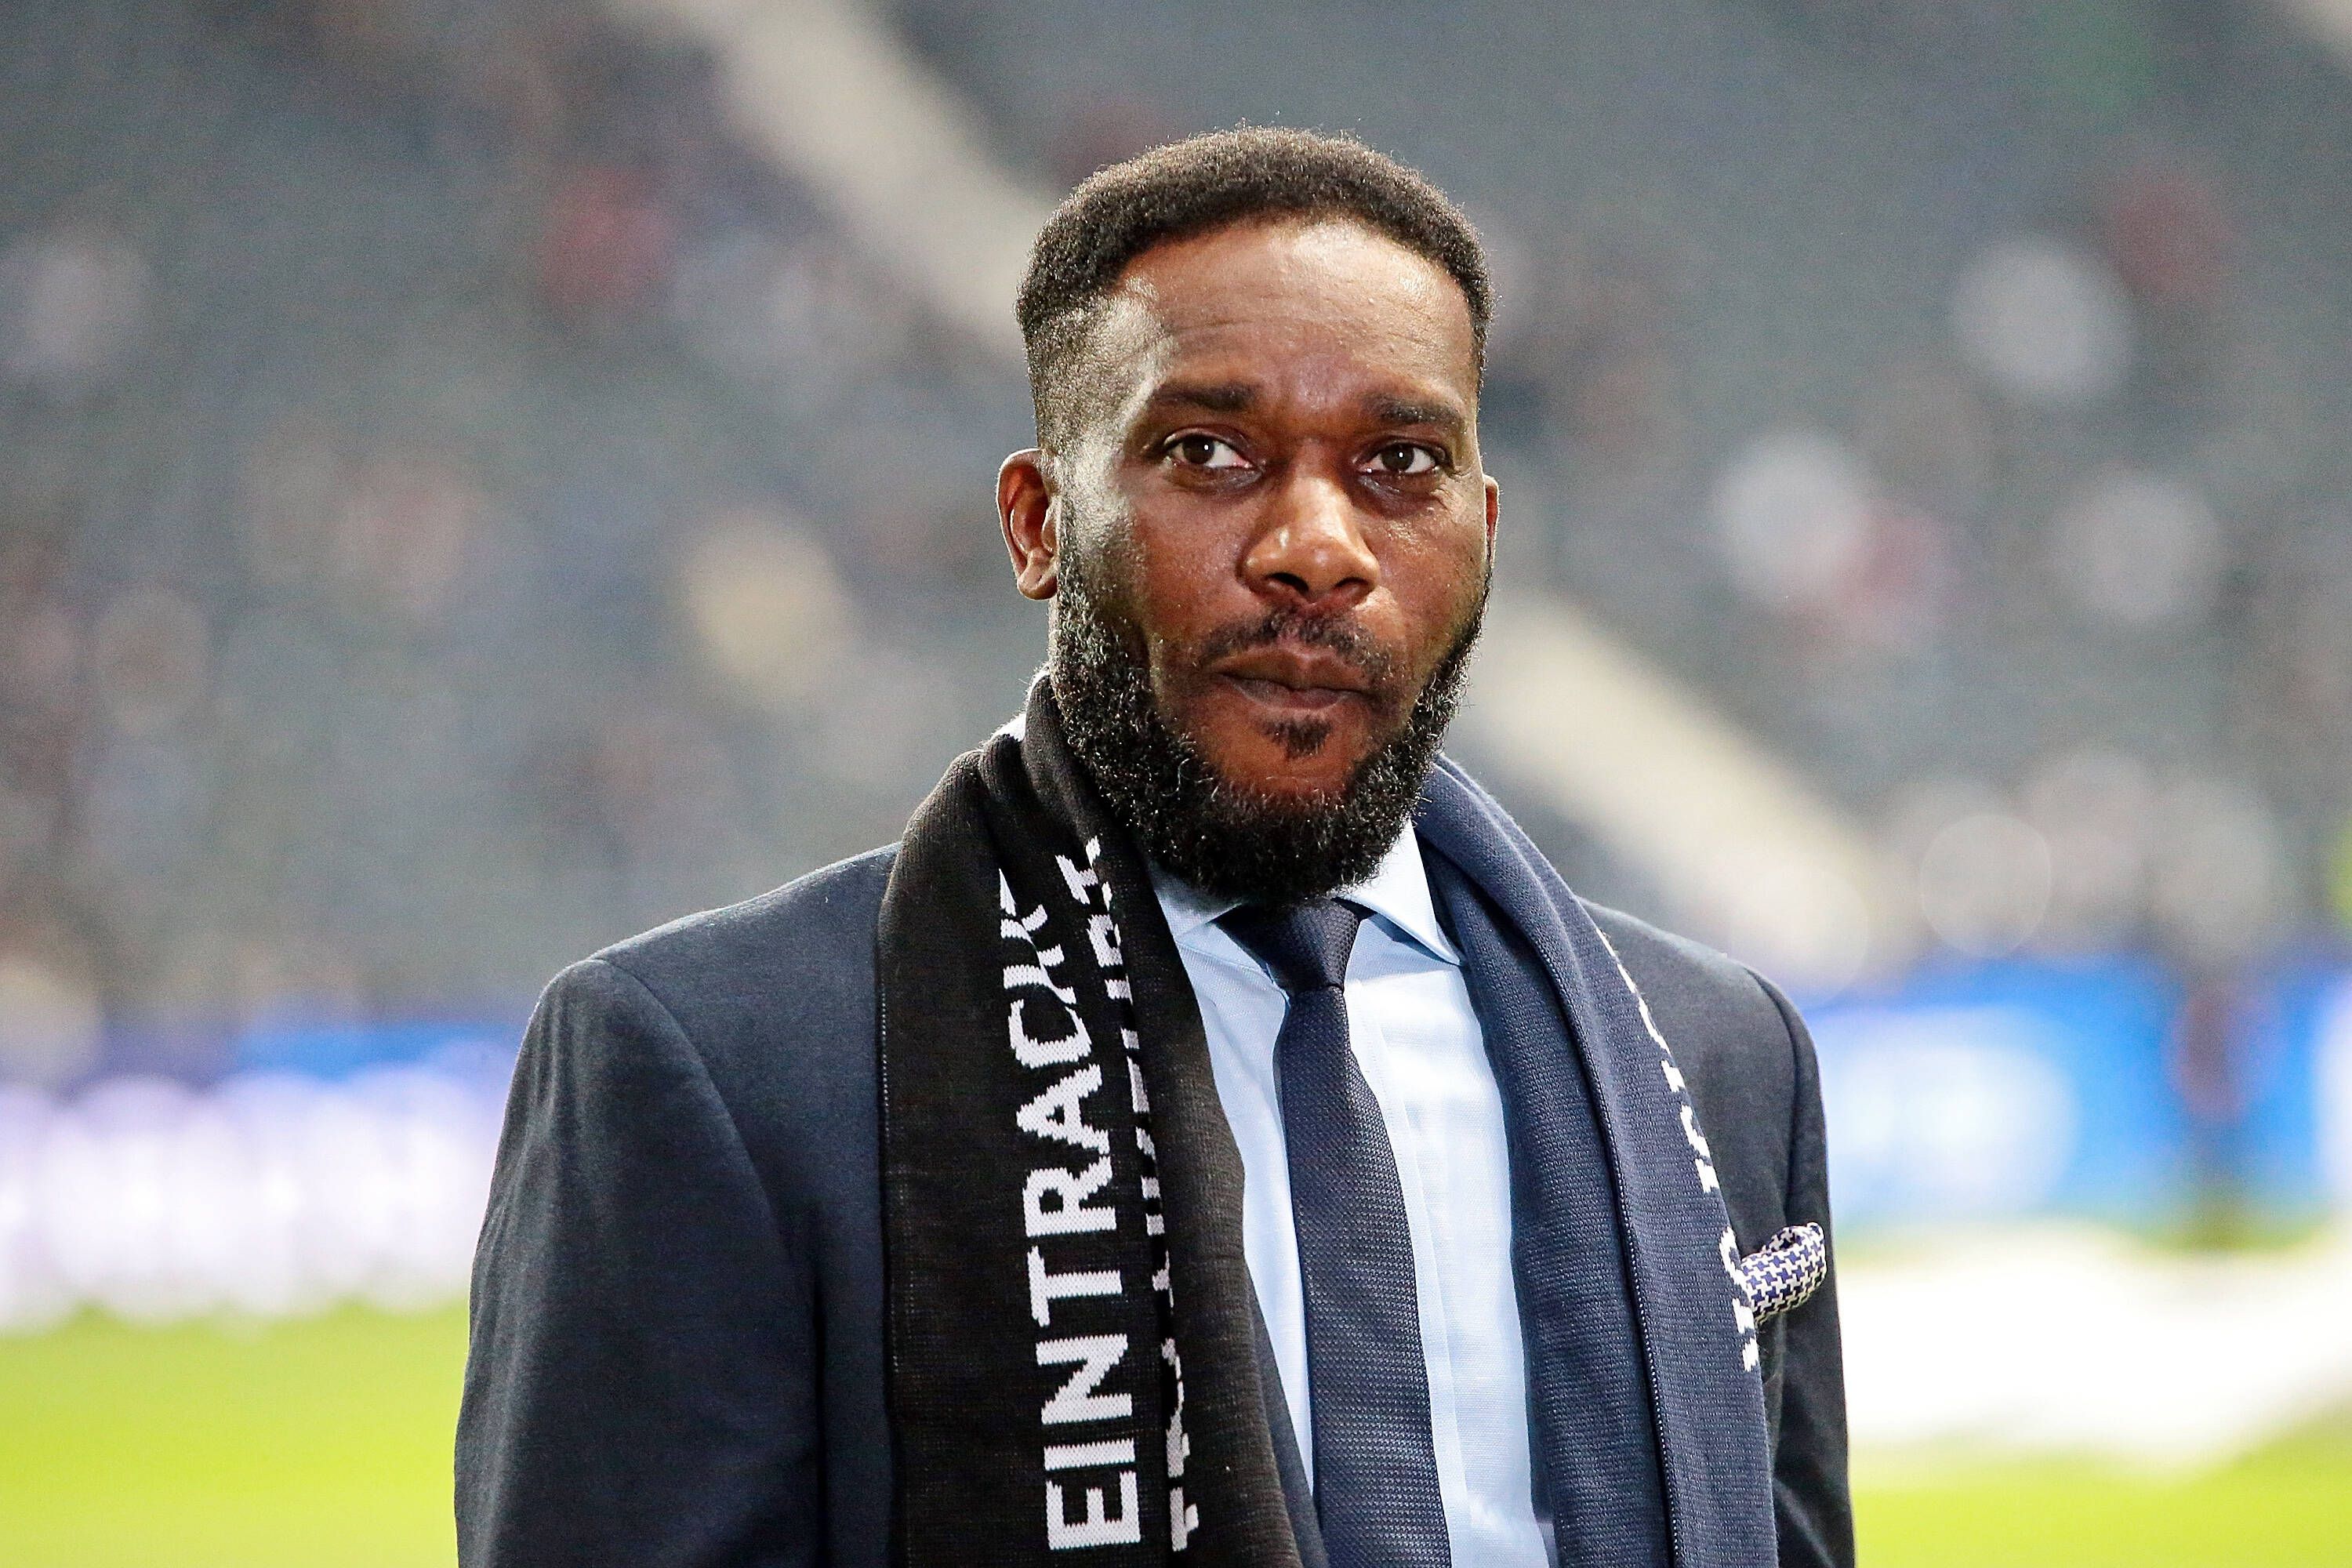 'The Super Eagles require constancy and stability' - Jay Jay Okocha